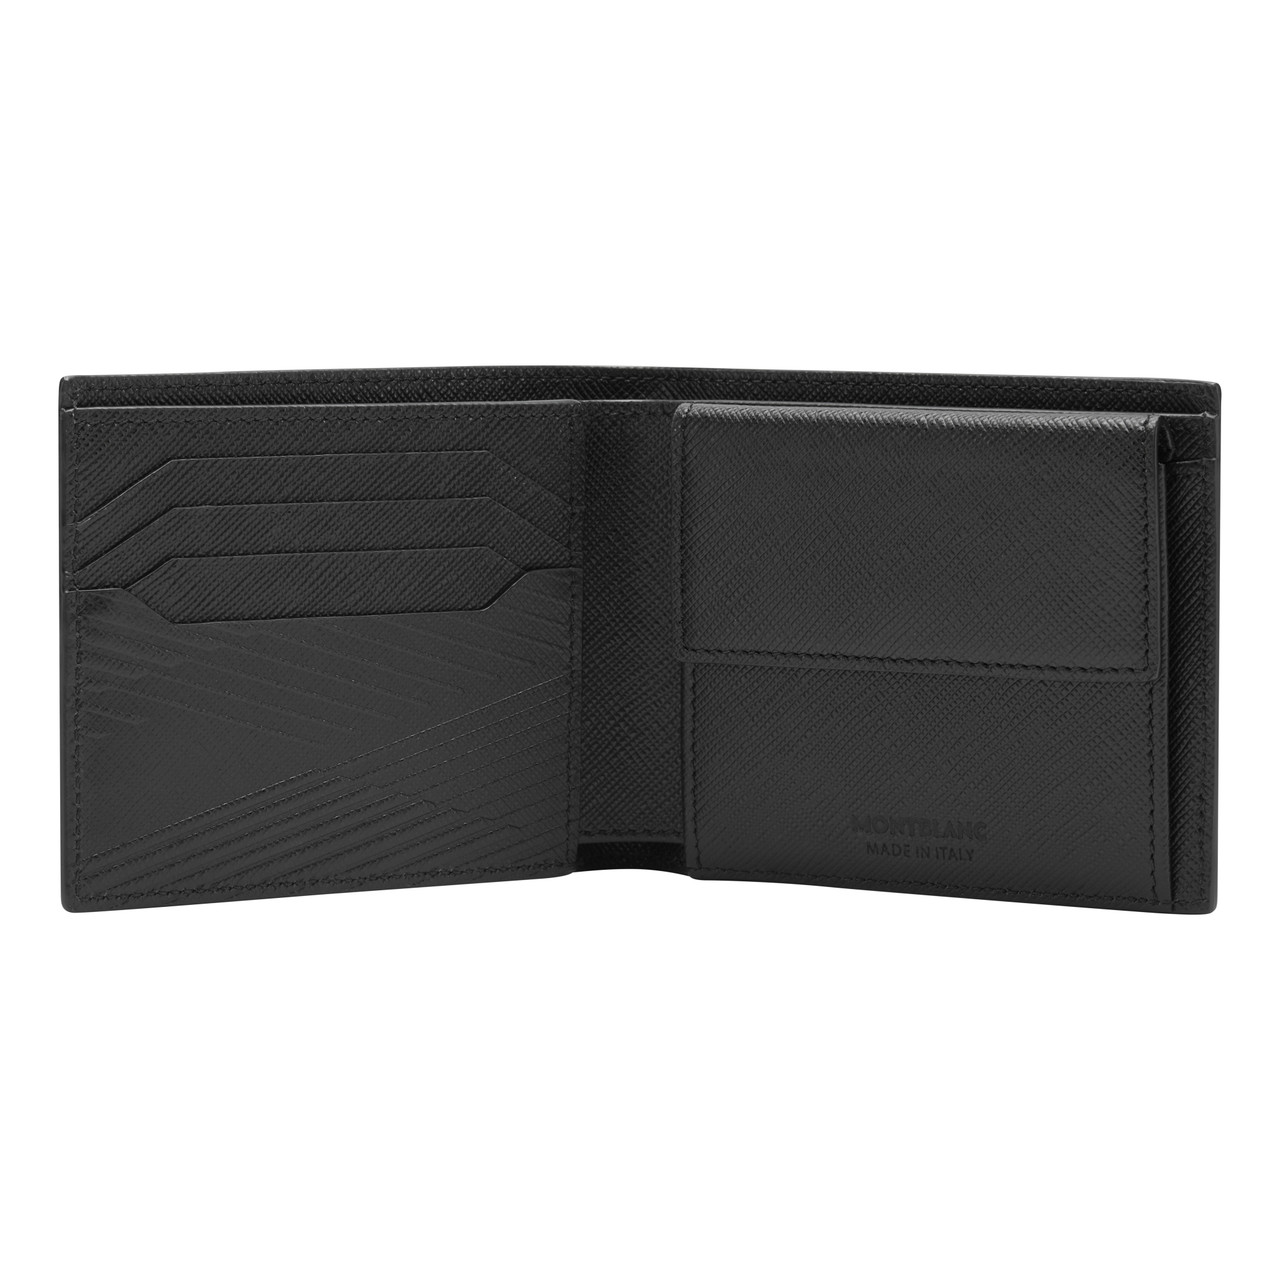 Genuine Montblanc For BMW Wallet With Coin Case Holder Black 80 21 5 ...